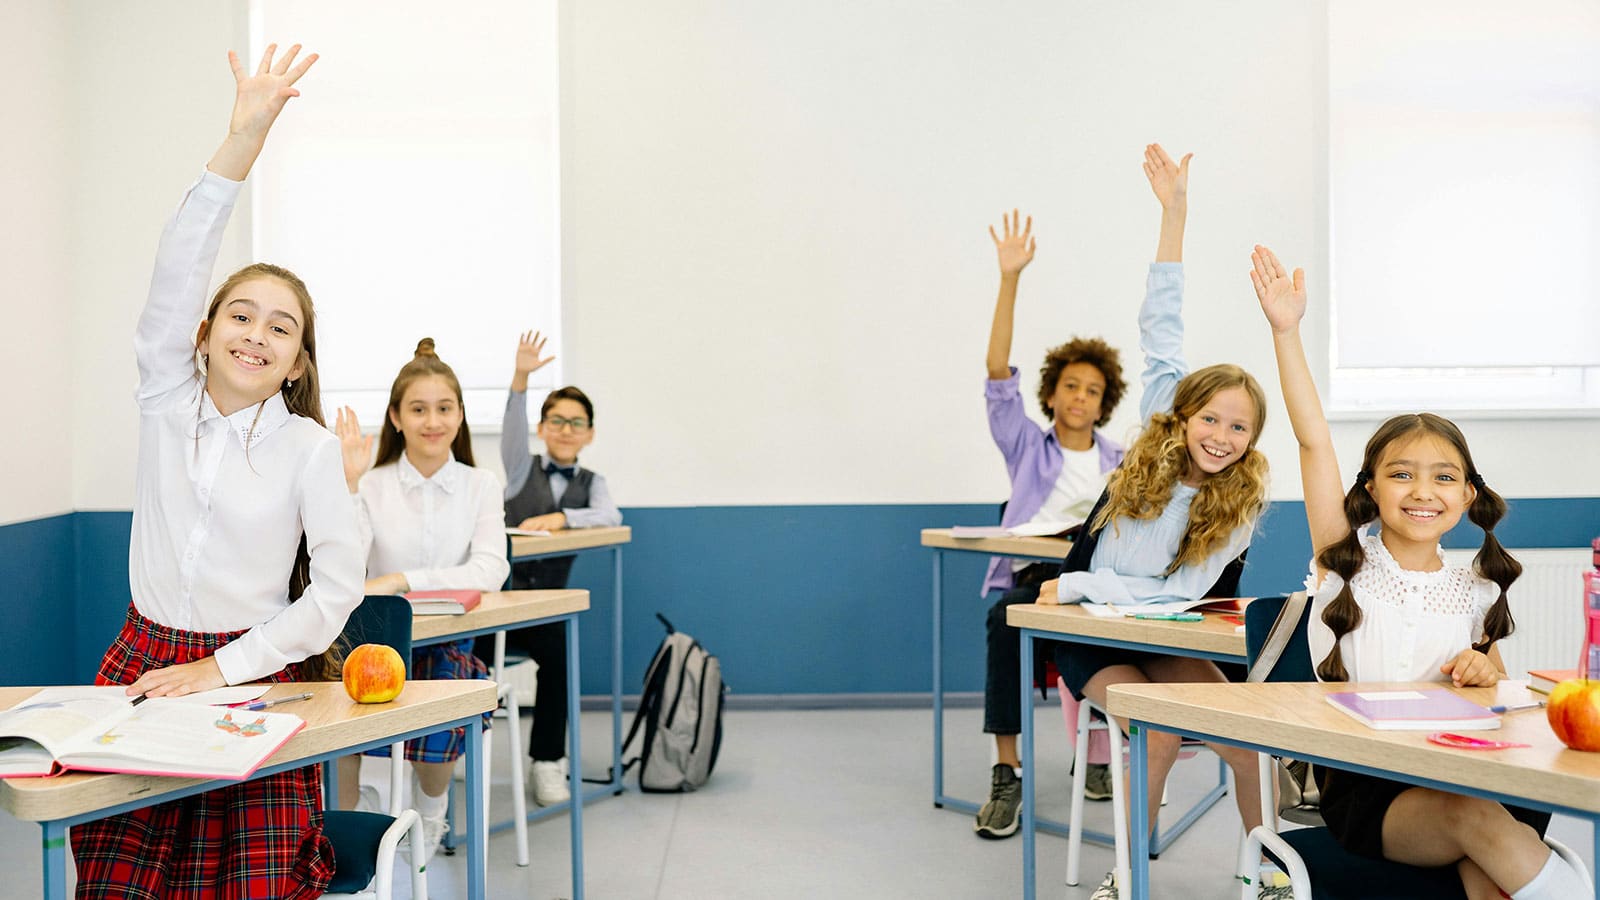 Classroom full of students raising their hands to answer a question